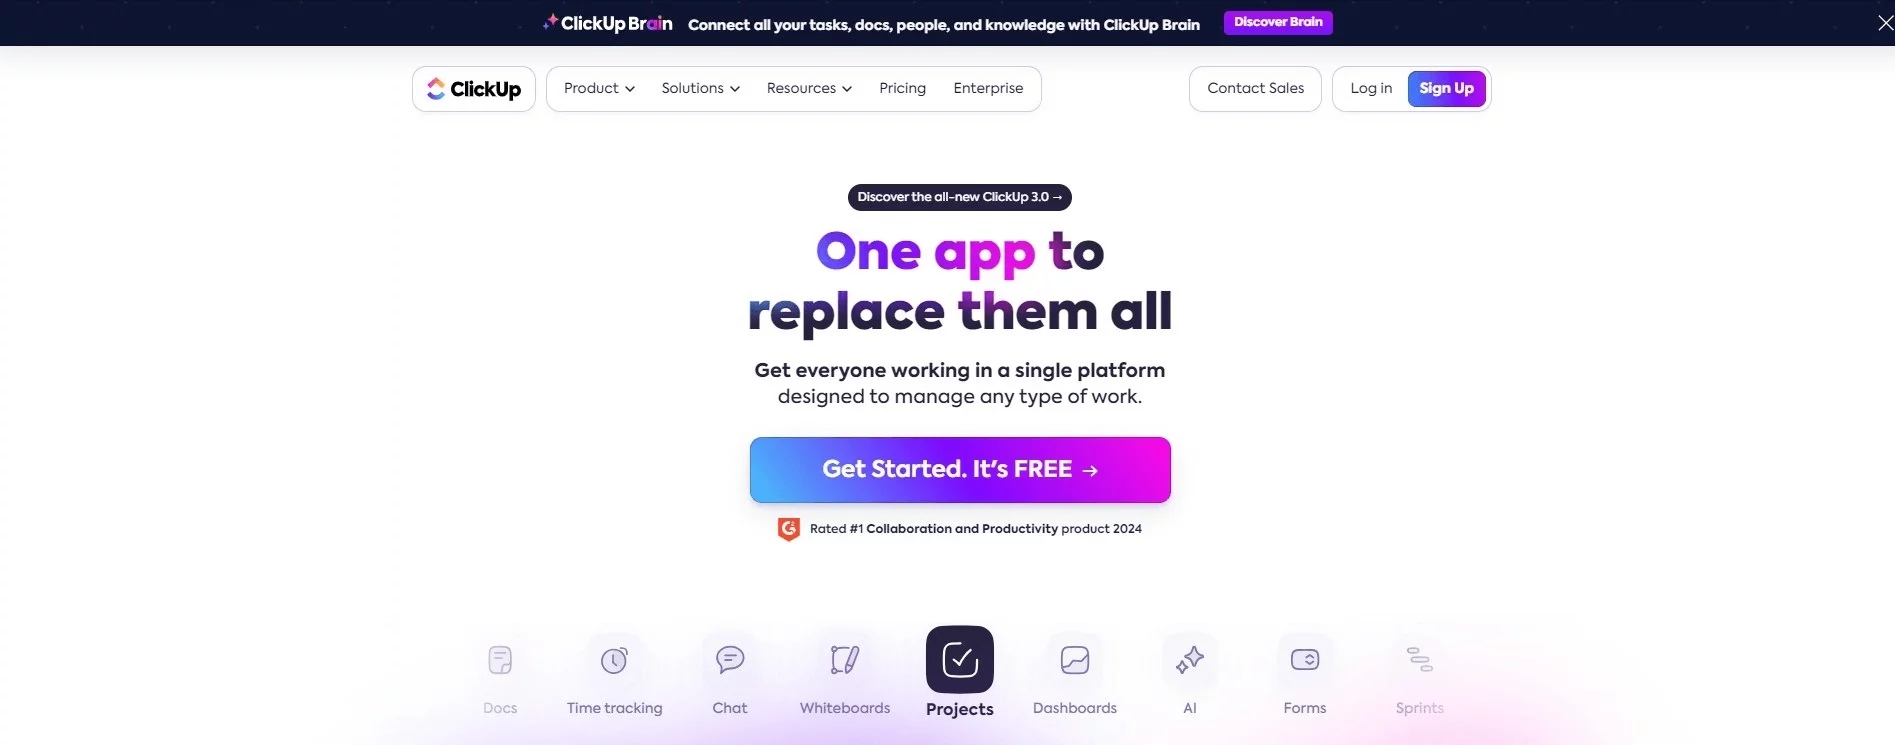 ClickUp homepage promoting its platform as an all-in-one solution for managing various types of work, offering a free start option.